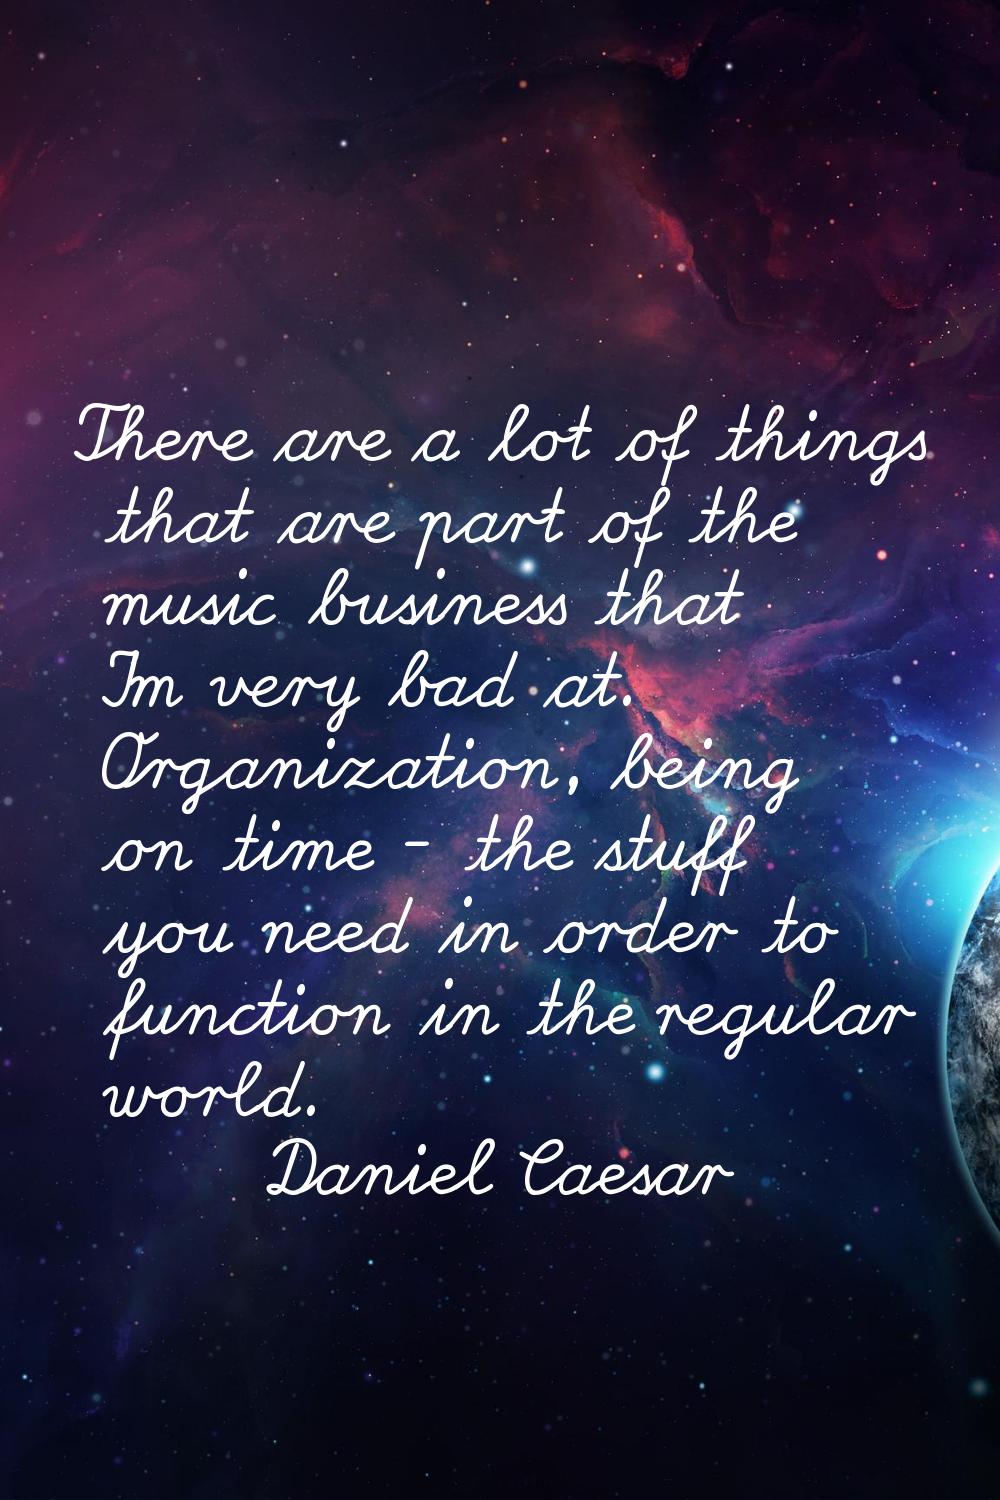 There are a lot of things that are part of the music business that I’m very bad at. Organization, b